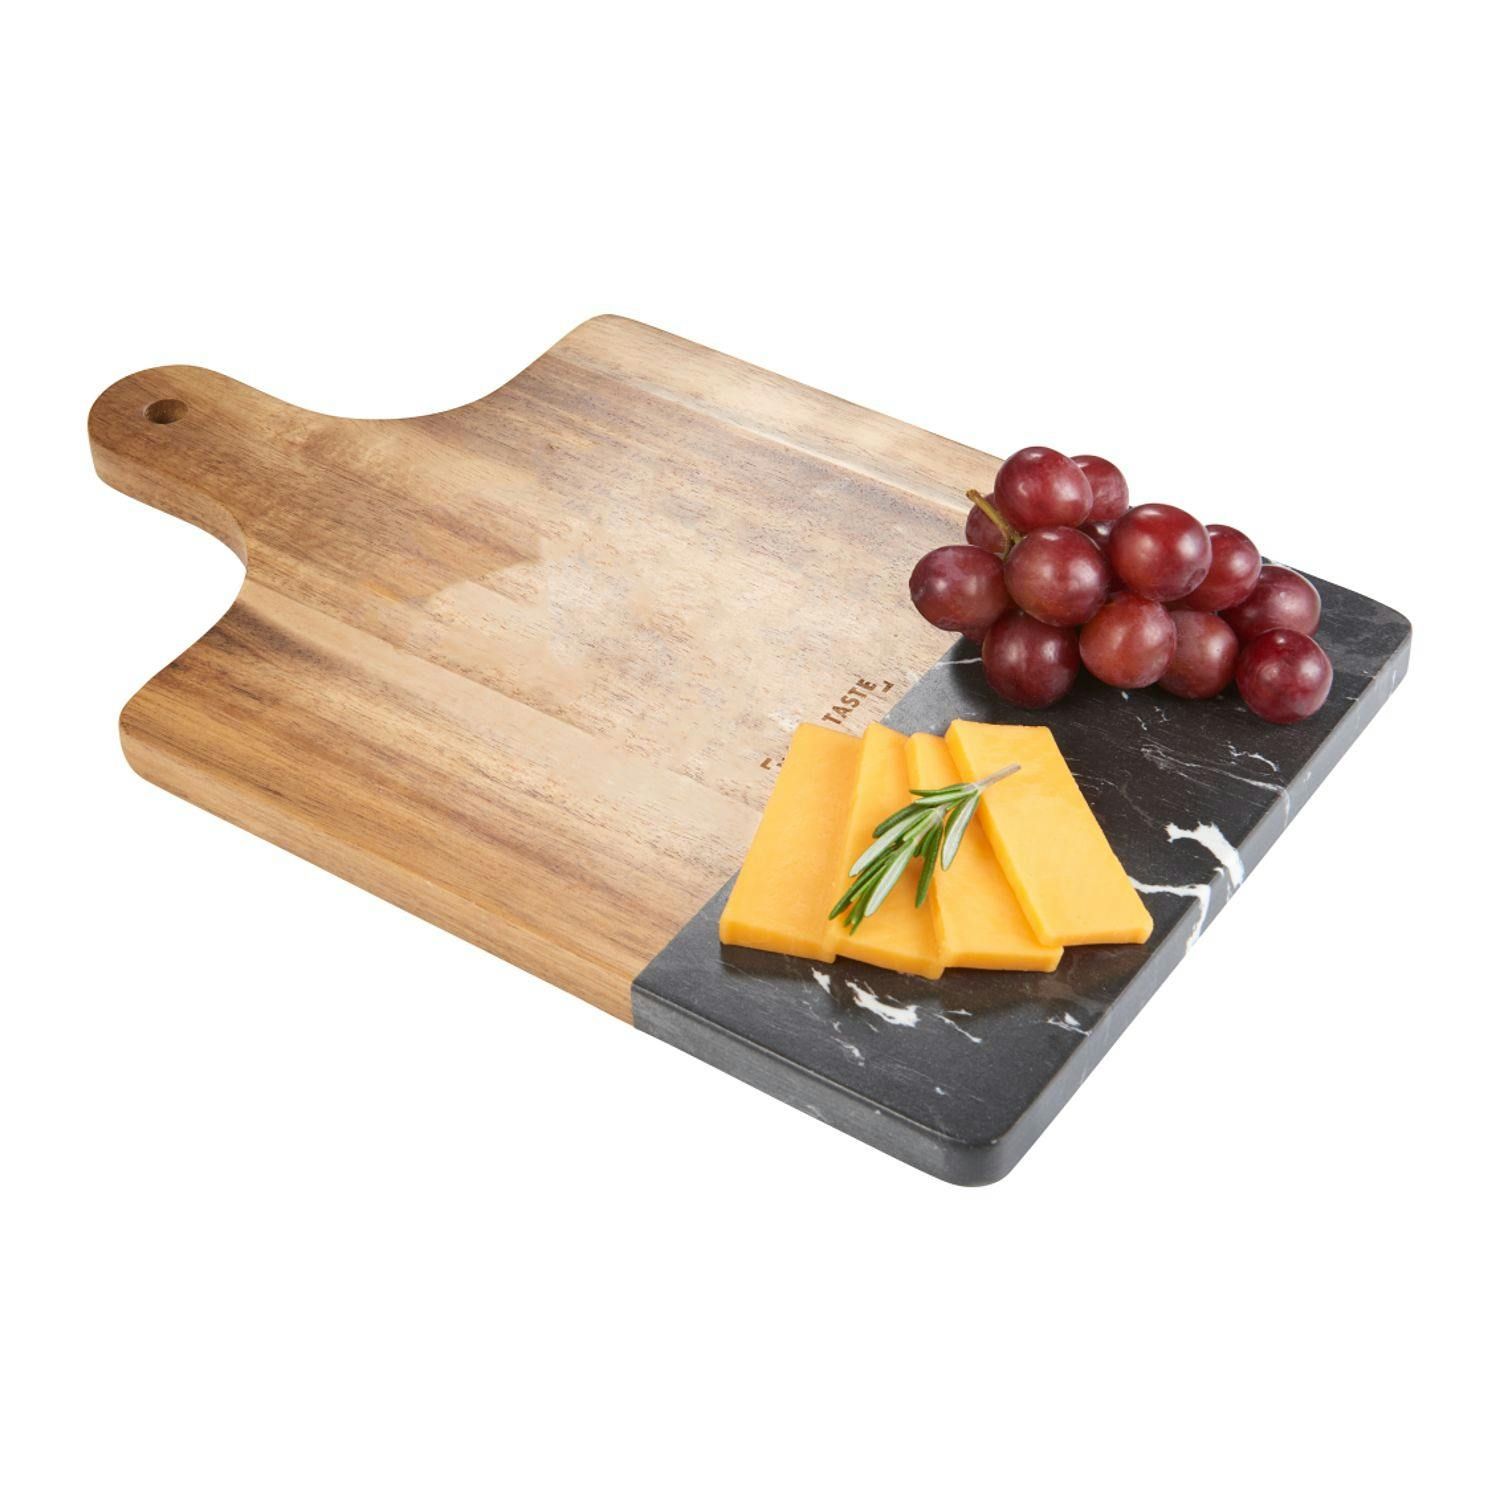 Black Marble and Wood Cutting Board - additional Image 1